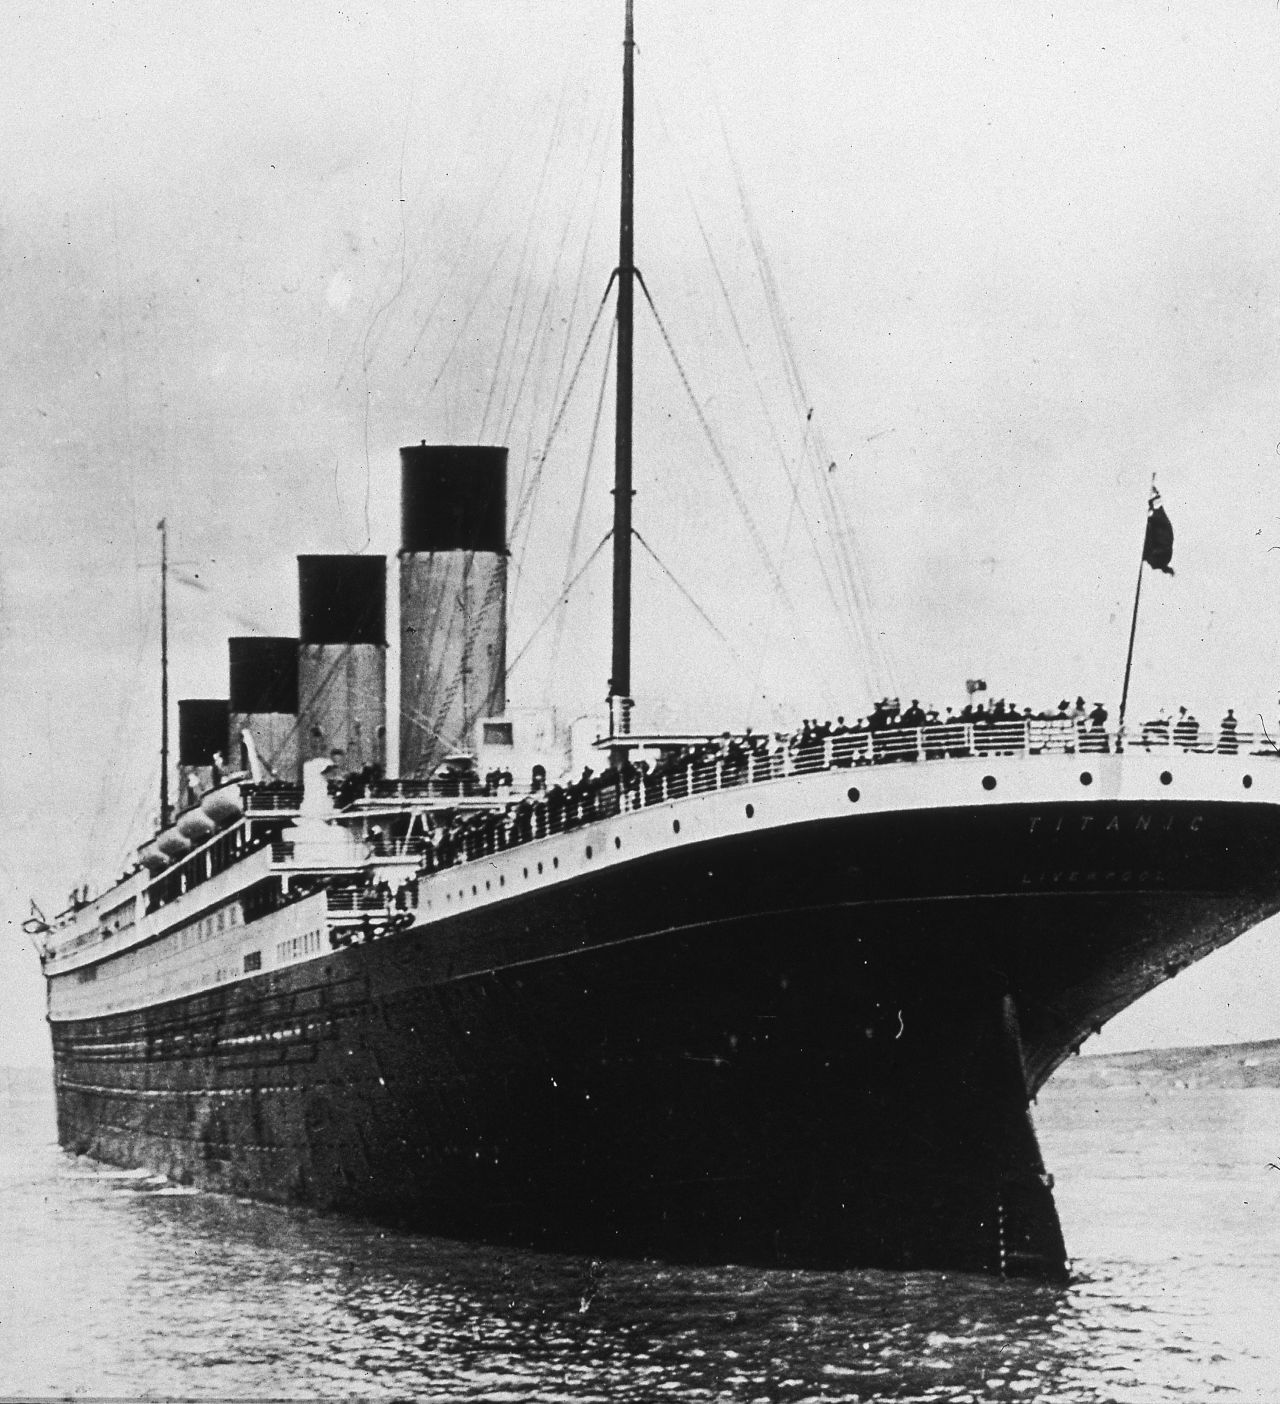 The White Star ocean liner Titanic on her first and last voyage in 1912.